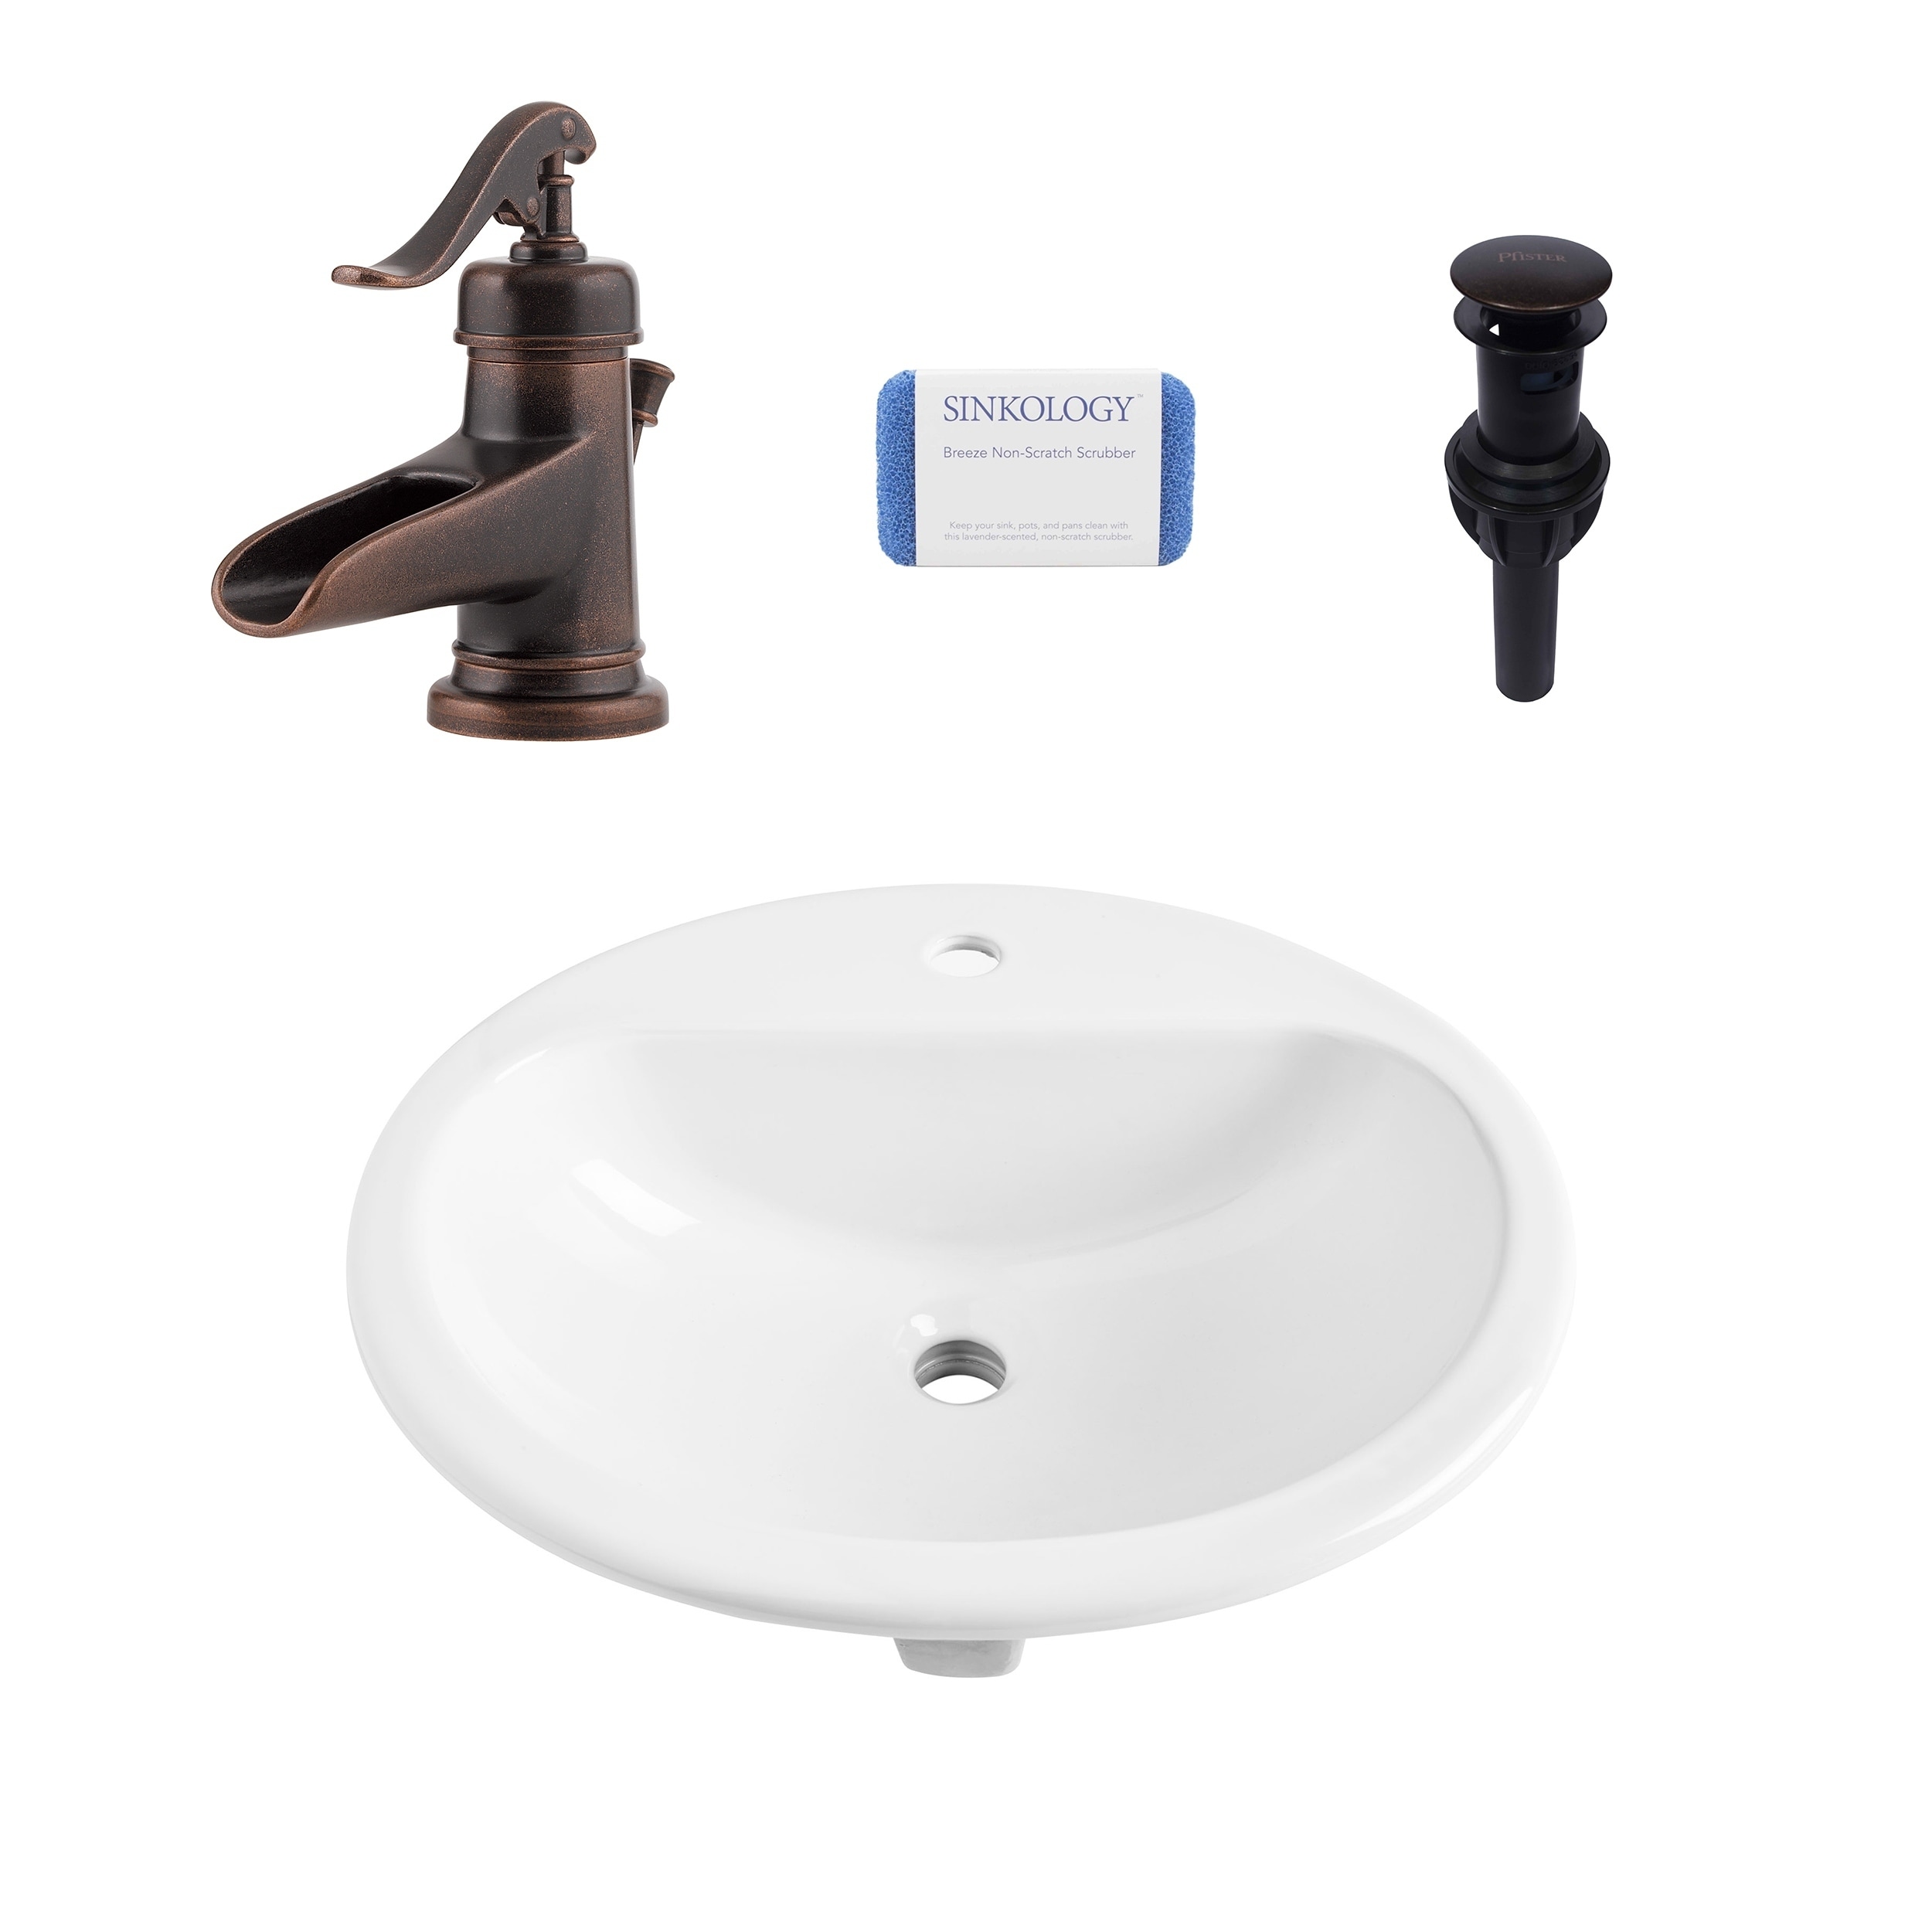 Rene Oval Drop In Vitreous China Bathroom Sink In White And Ashfield Rustic Bronze Faucet Kit